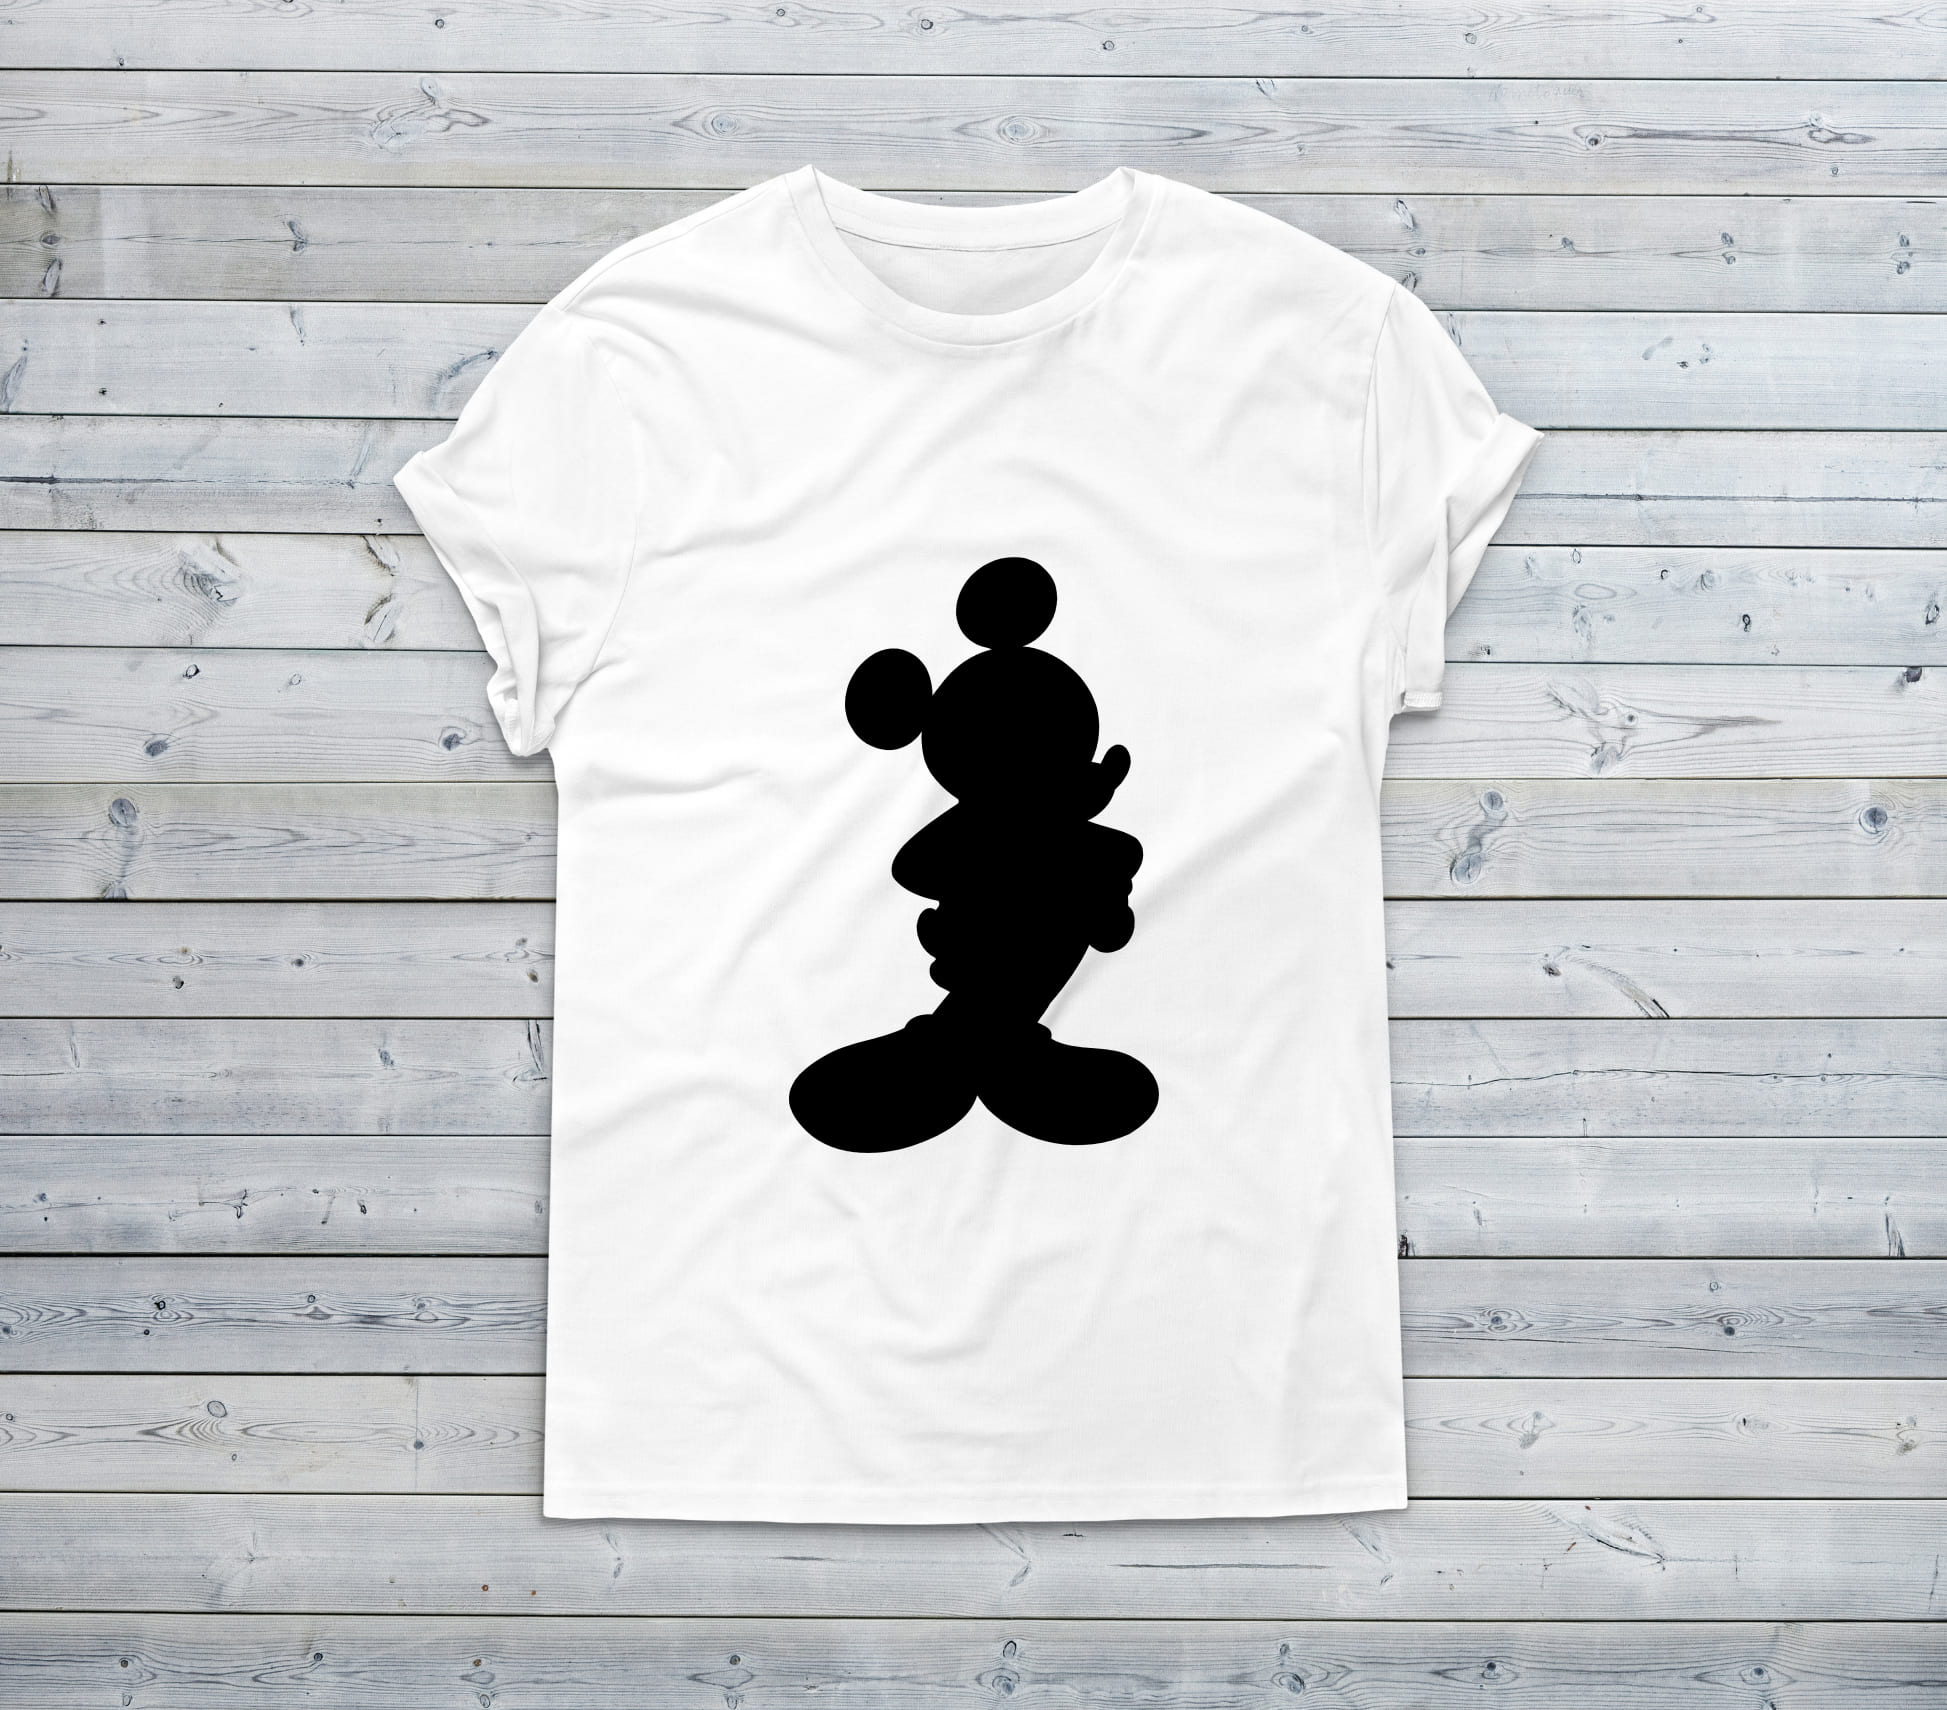 Classic white t-shirt with the silhouette mickey mouse.